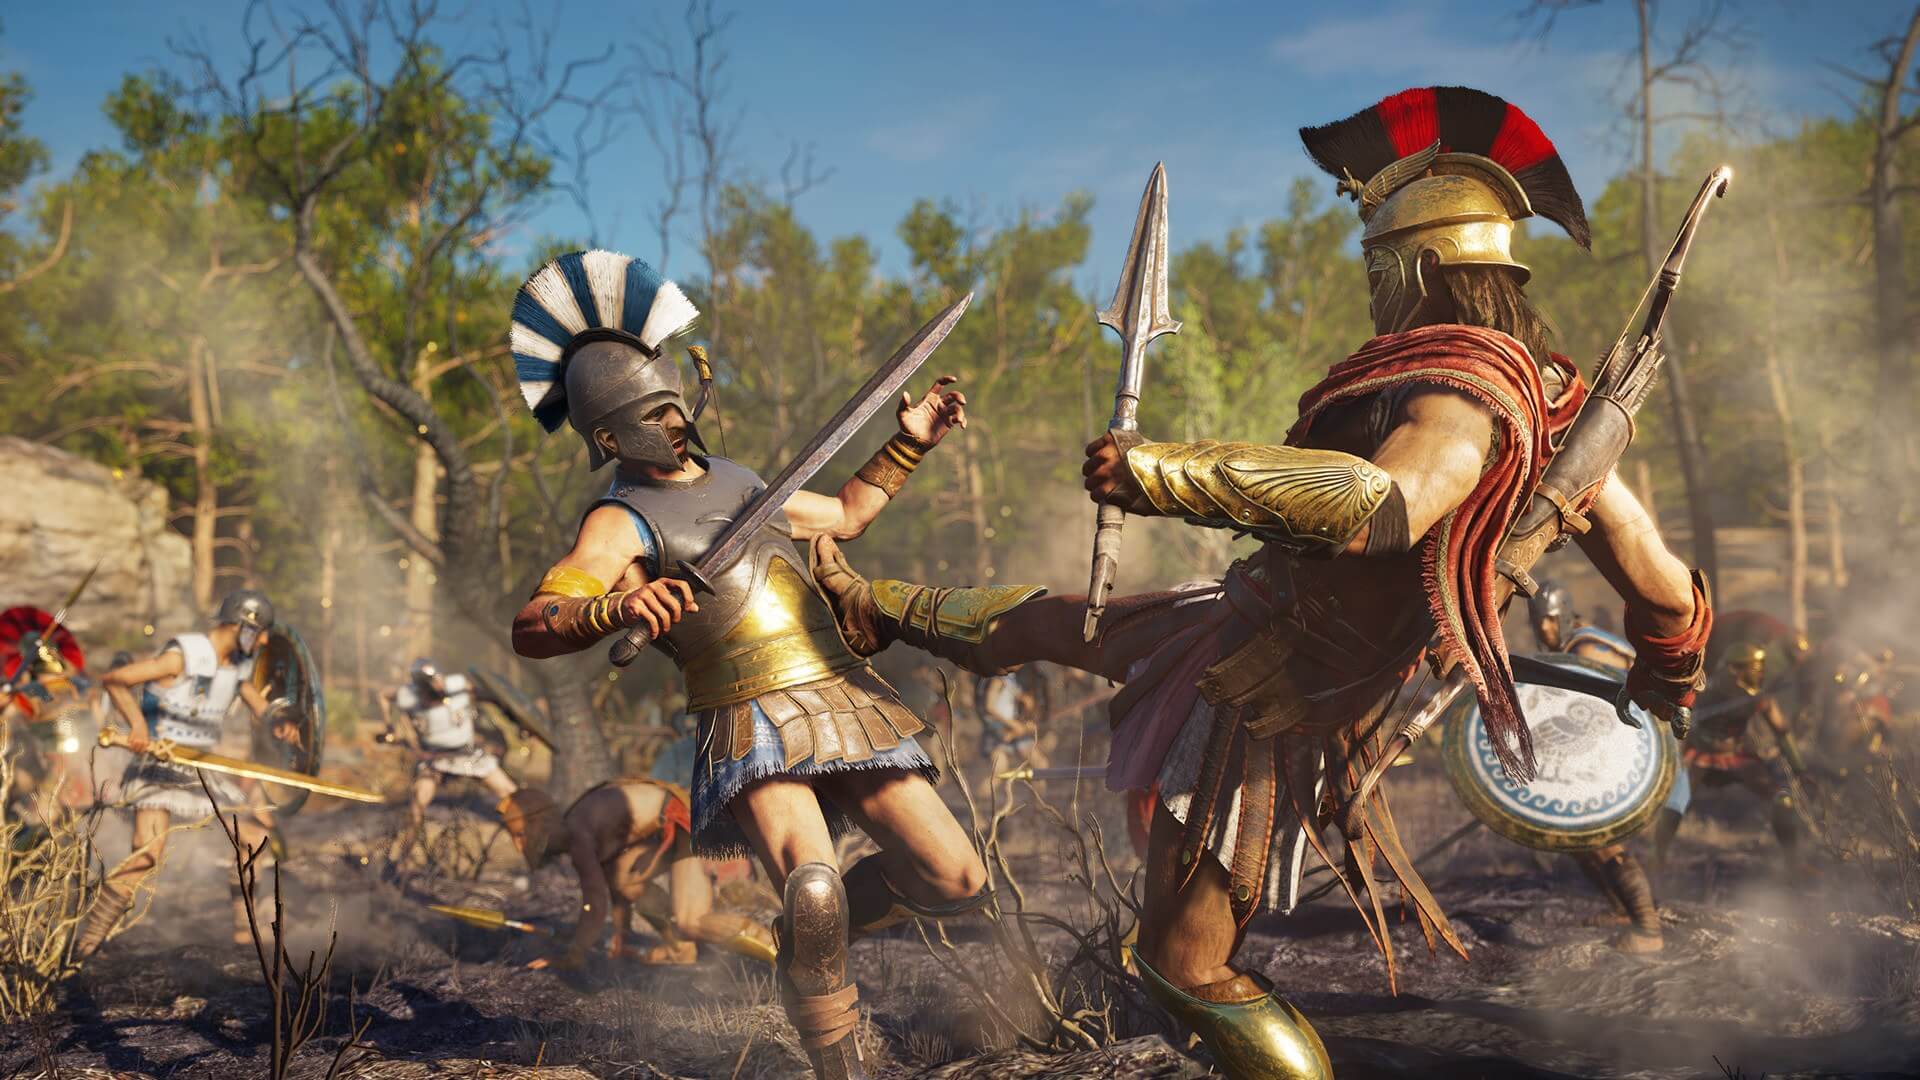 Assassin's Creed Odyssey hits 62K concurrent players on Steam, beating Origins' peak